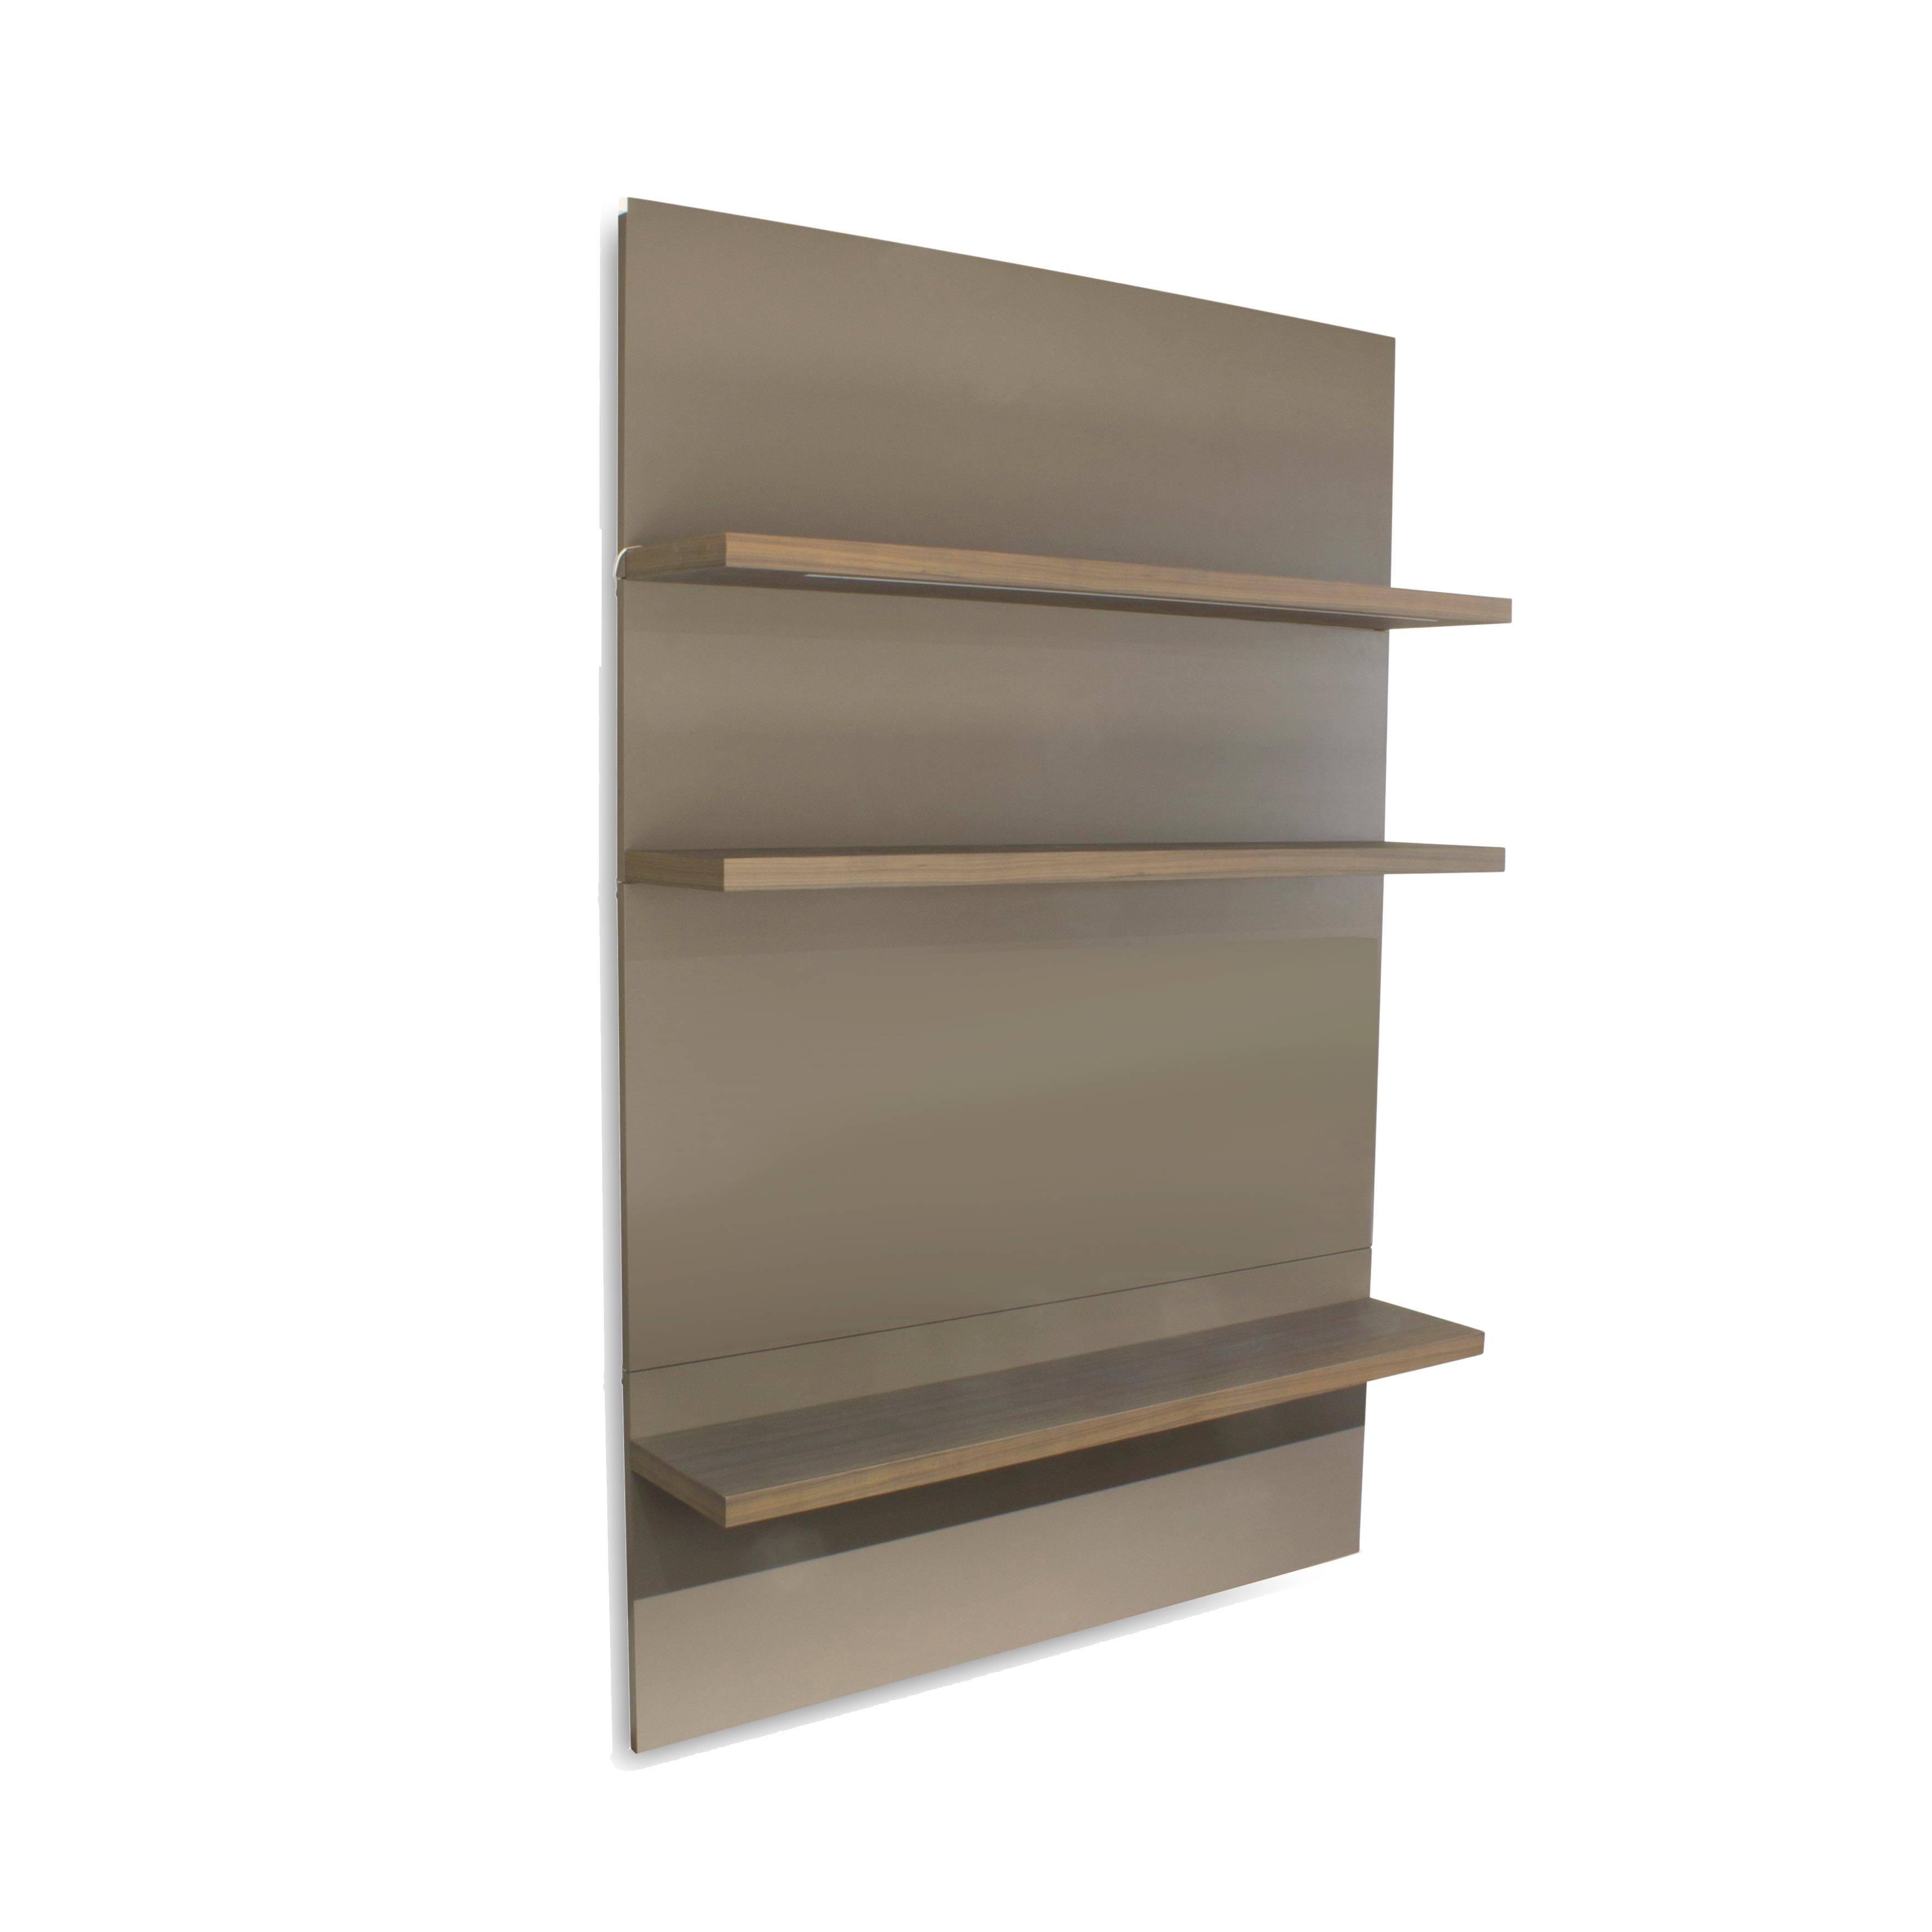 A convenient shelving situation for any environment, the boiseries panels can be used in conjunction with other Former elements or can be situated on their own.